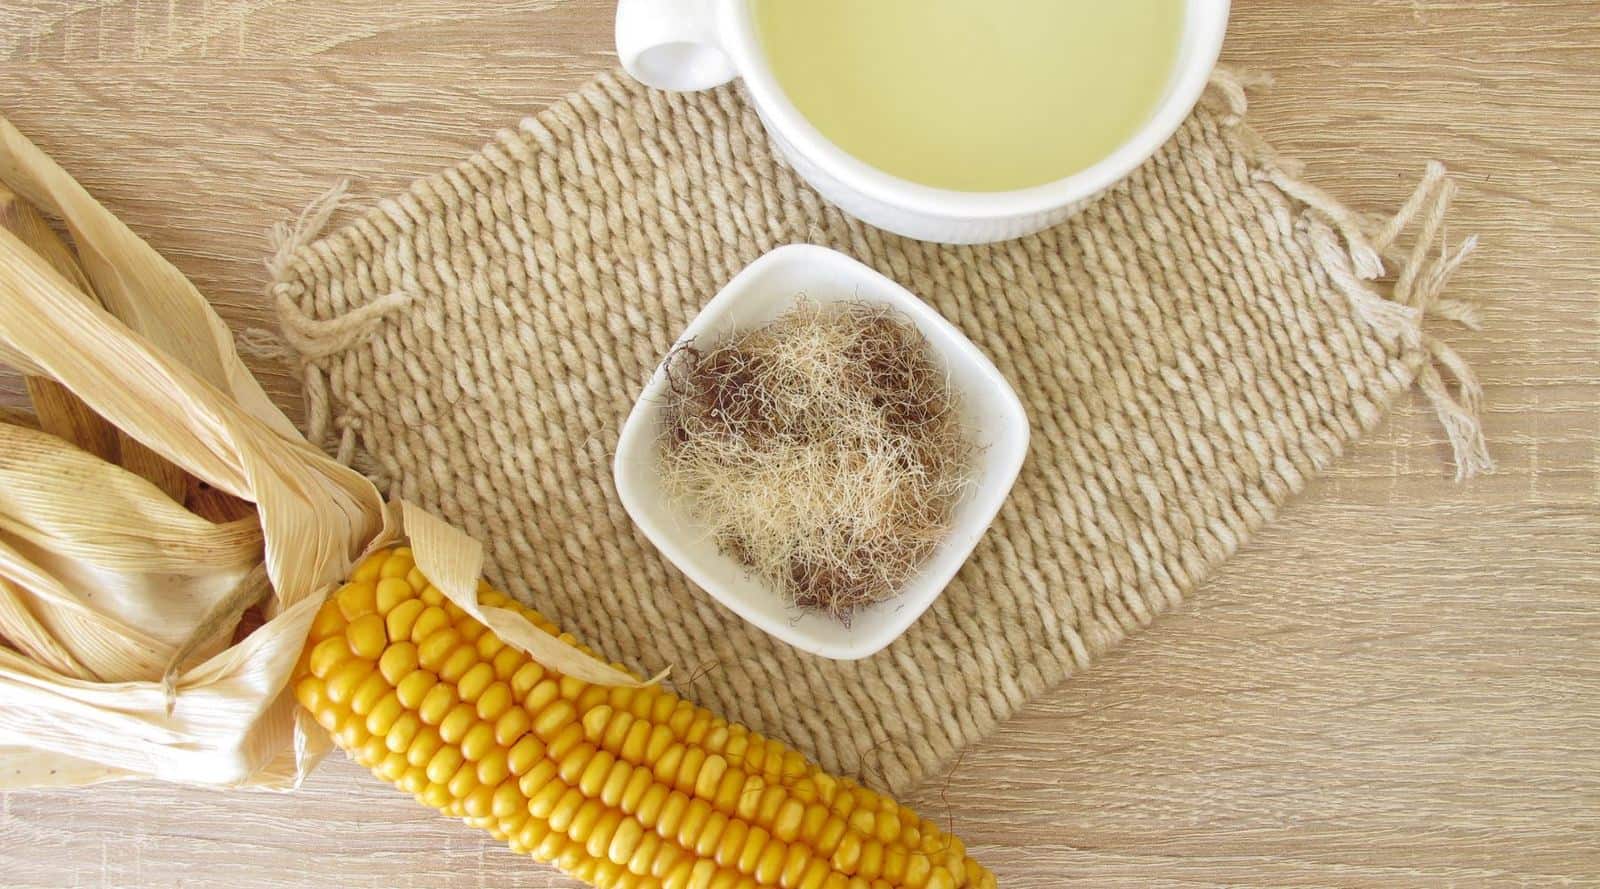 corn silk tea: preparation, health benefits and possible side effects